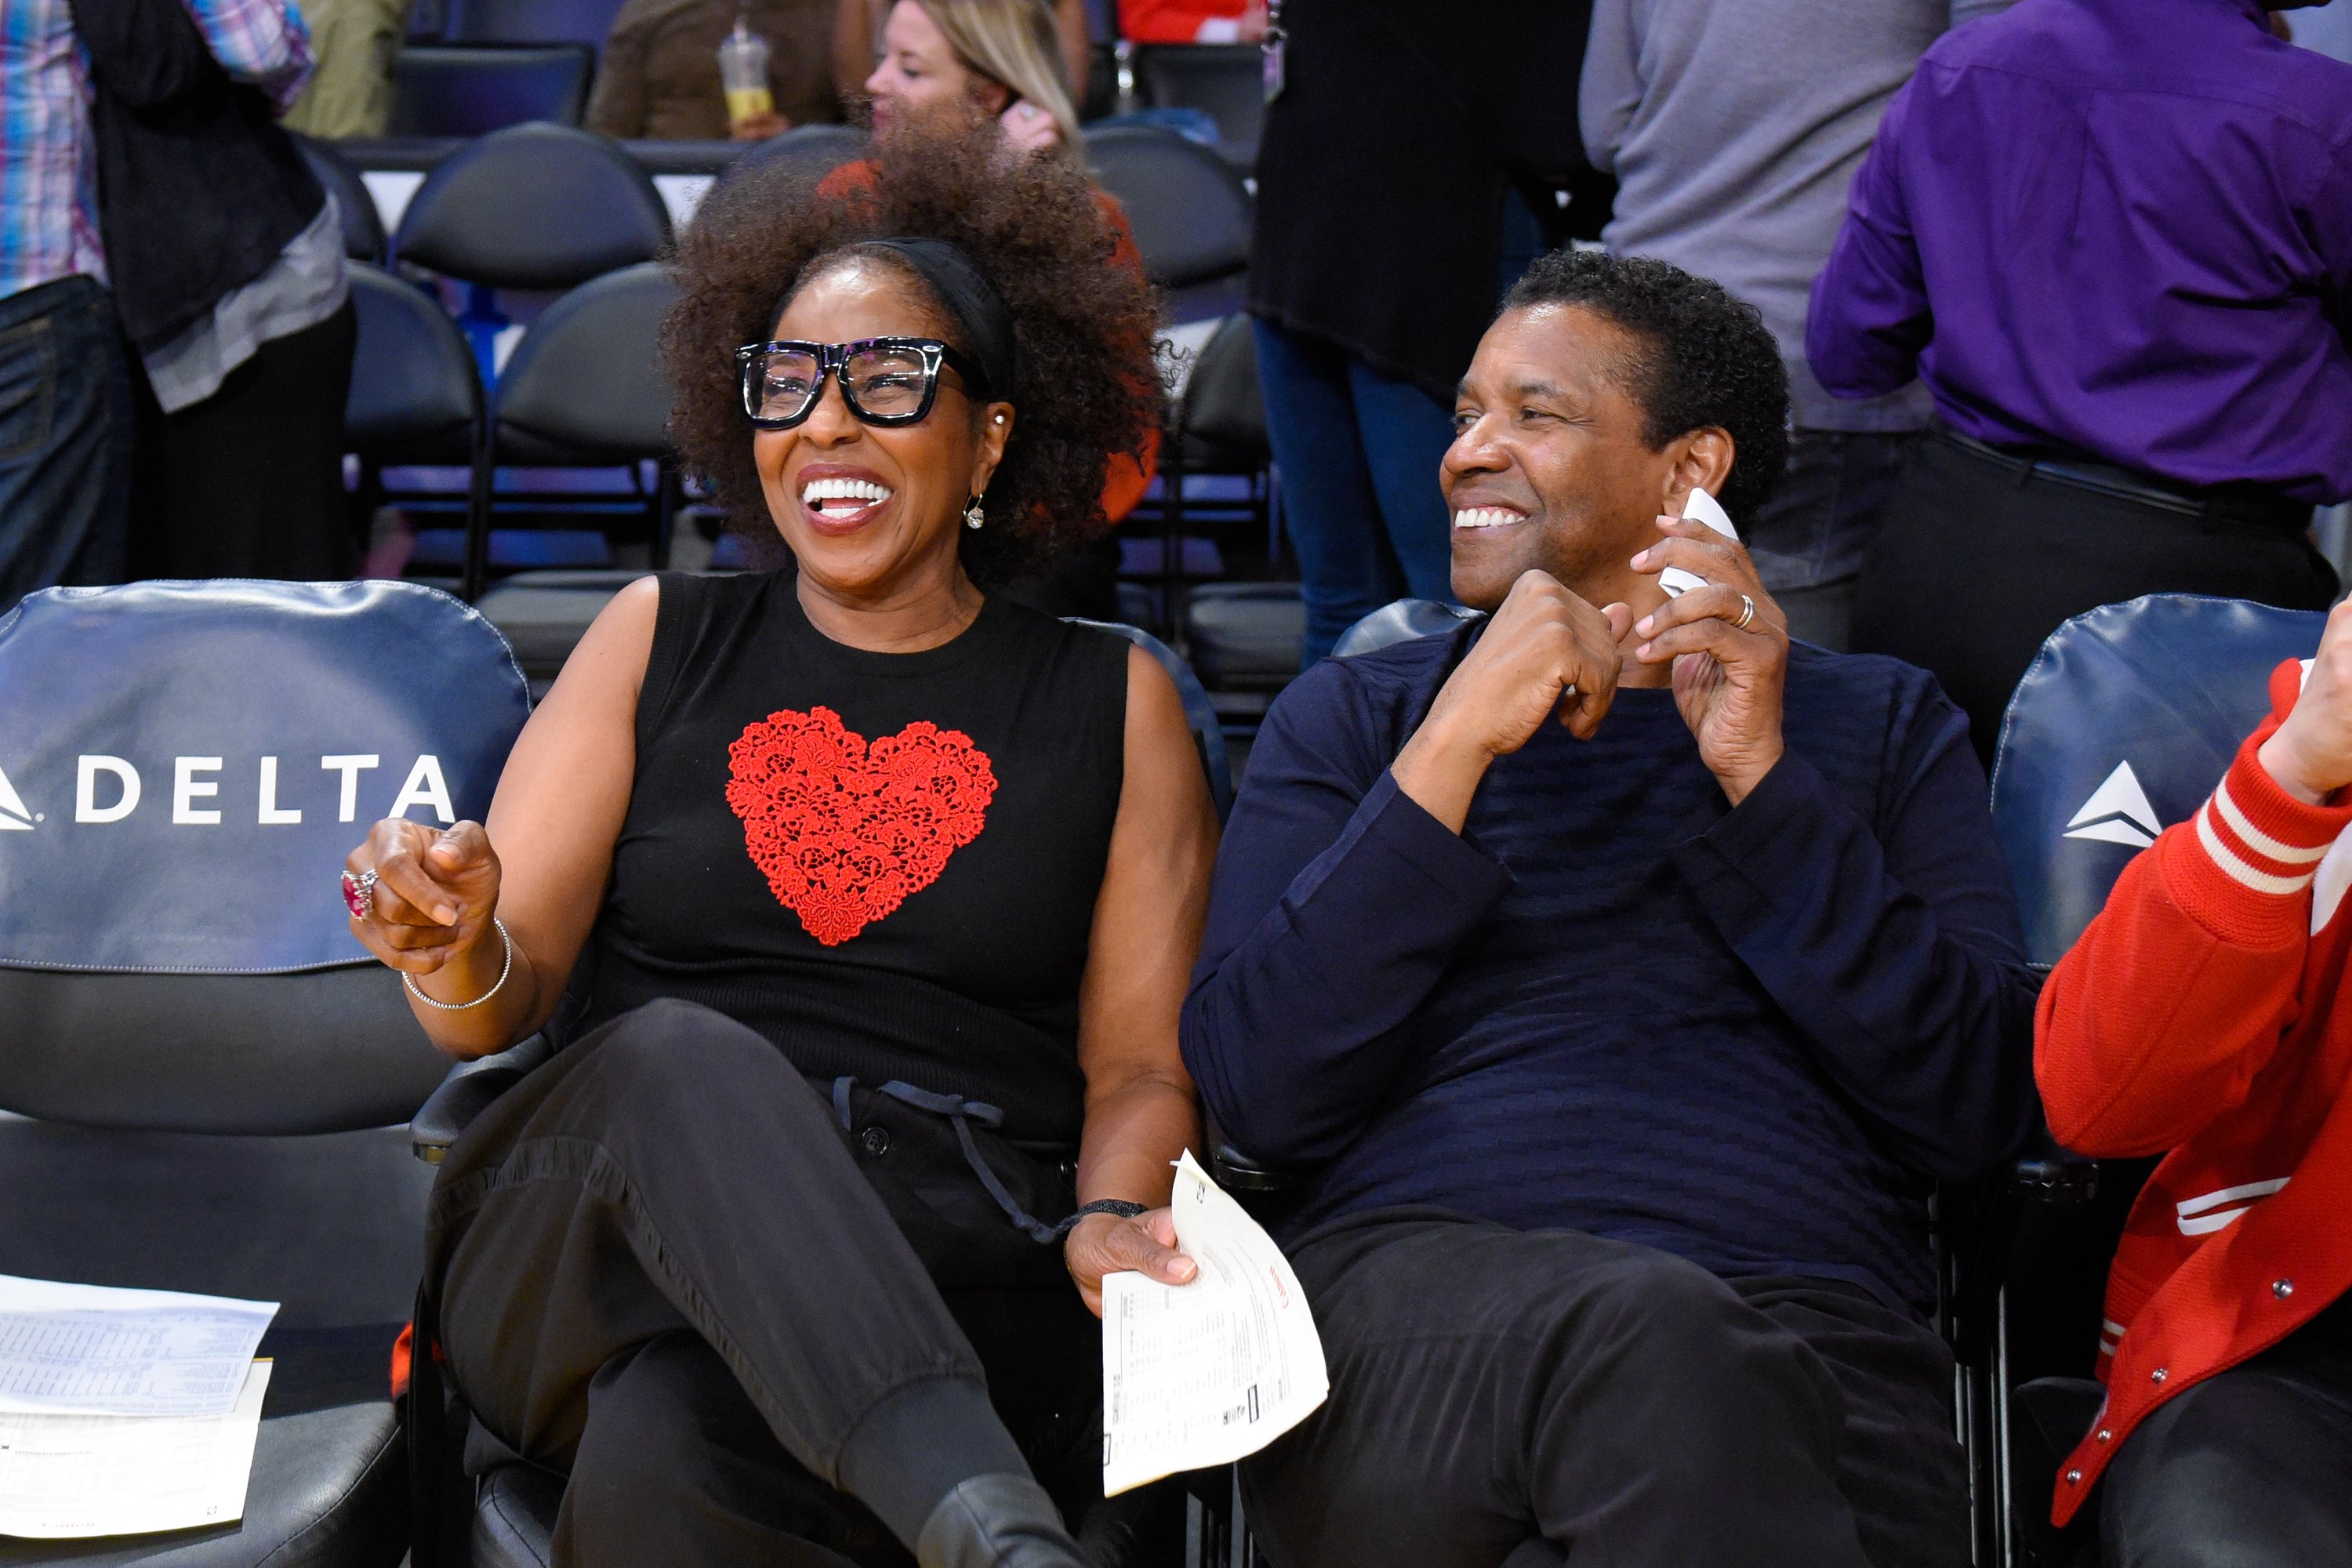 Denzel Washington and Pauletta Washington during a basketball game between the Sacramento Kings and the Los Angeles Lakers at Staples Center on February 14, 2017 in Los Angeles, California. | Source: Getty Images